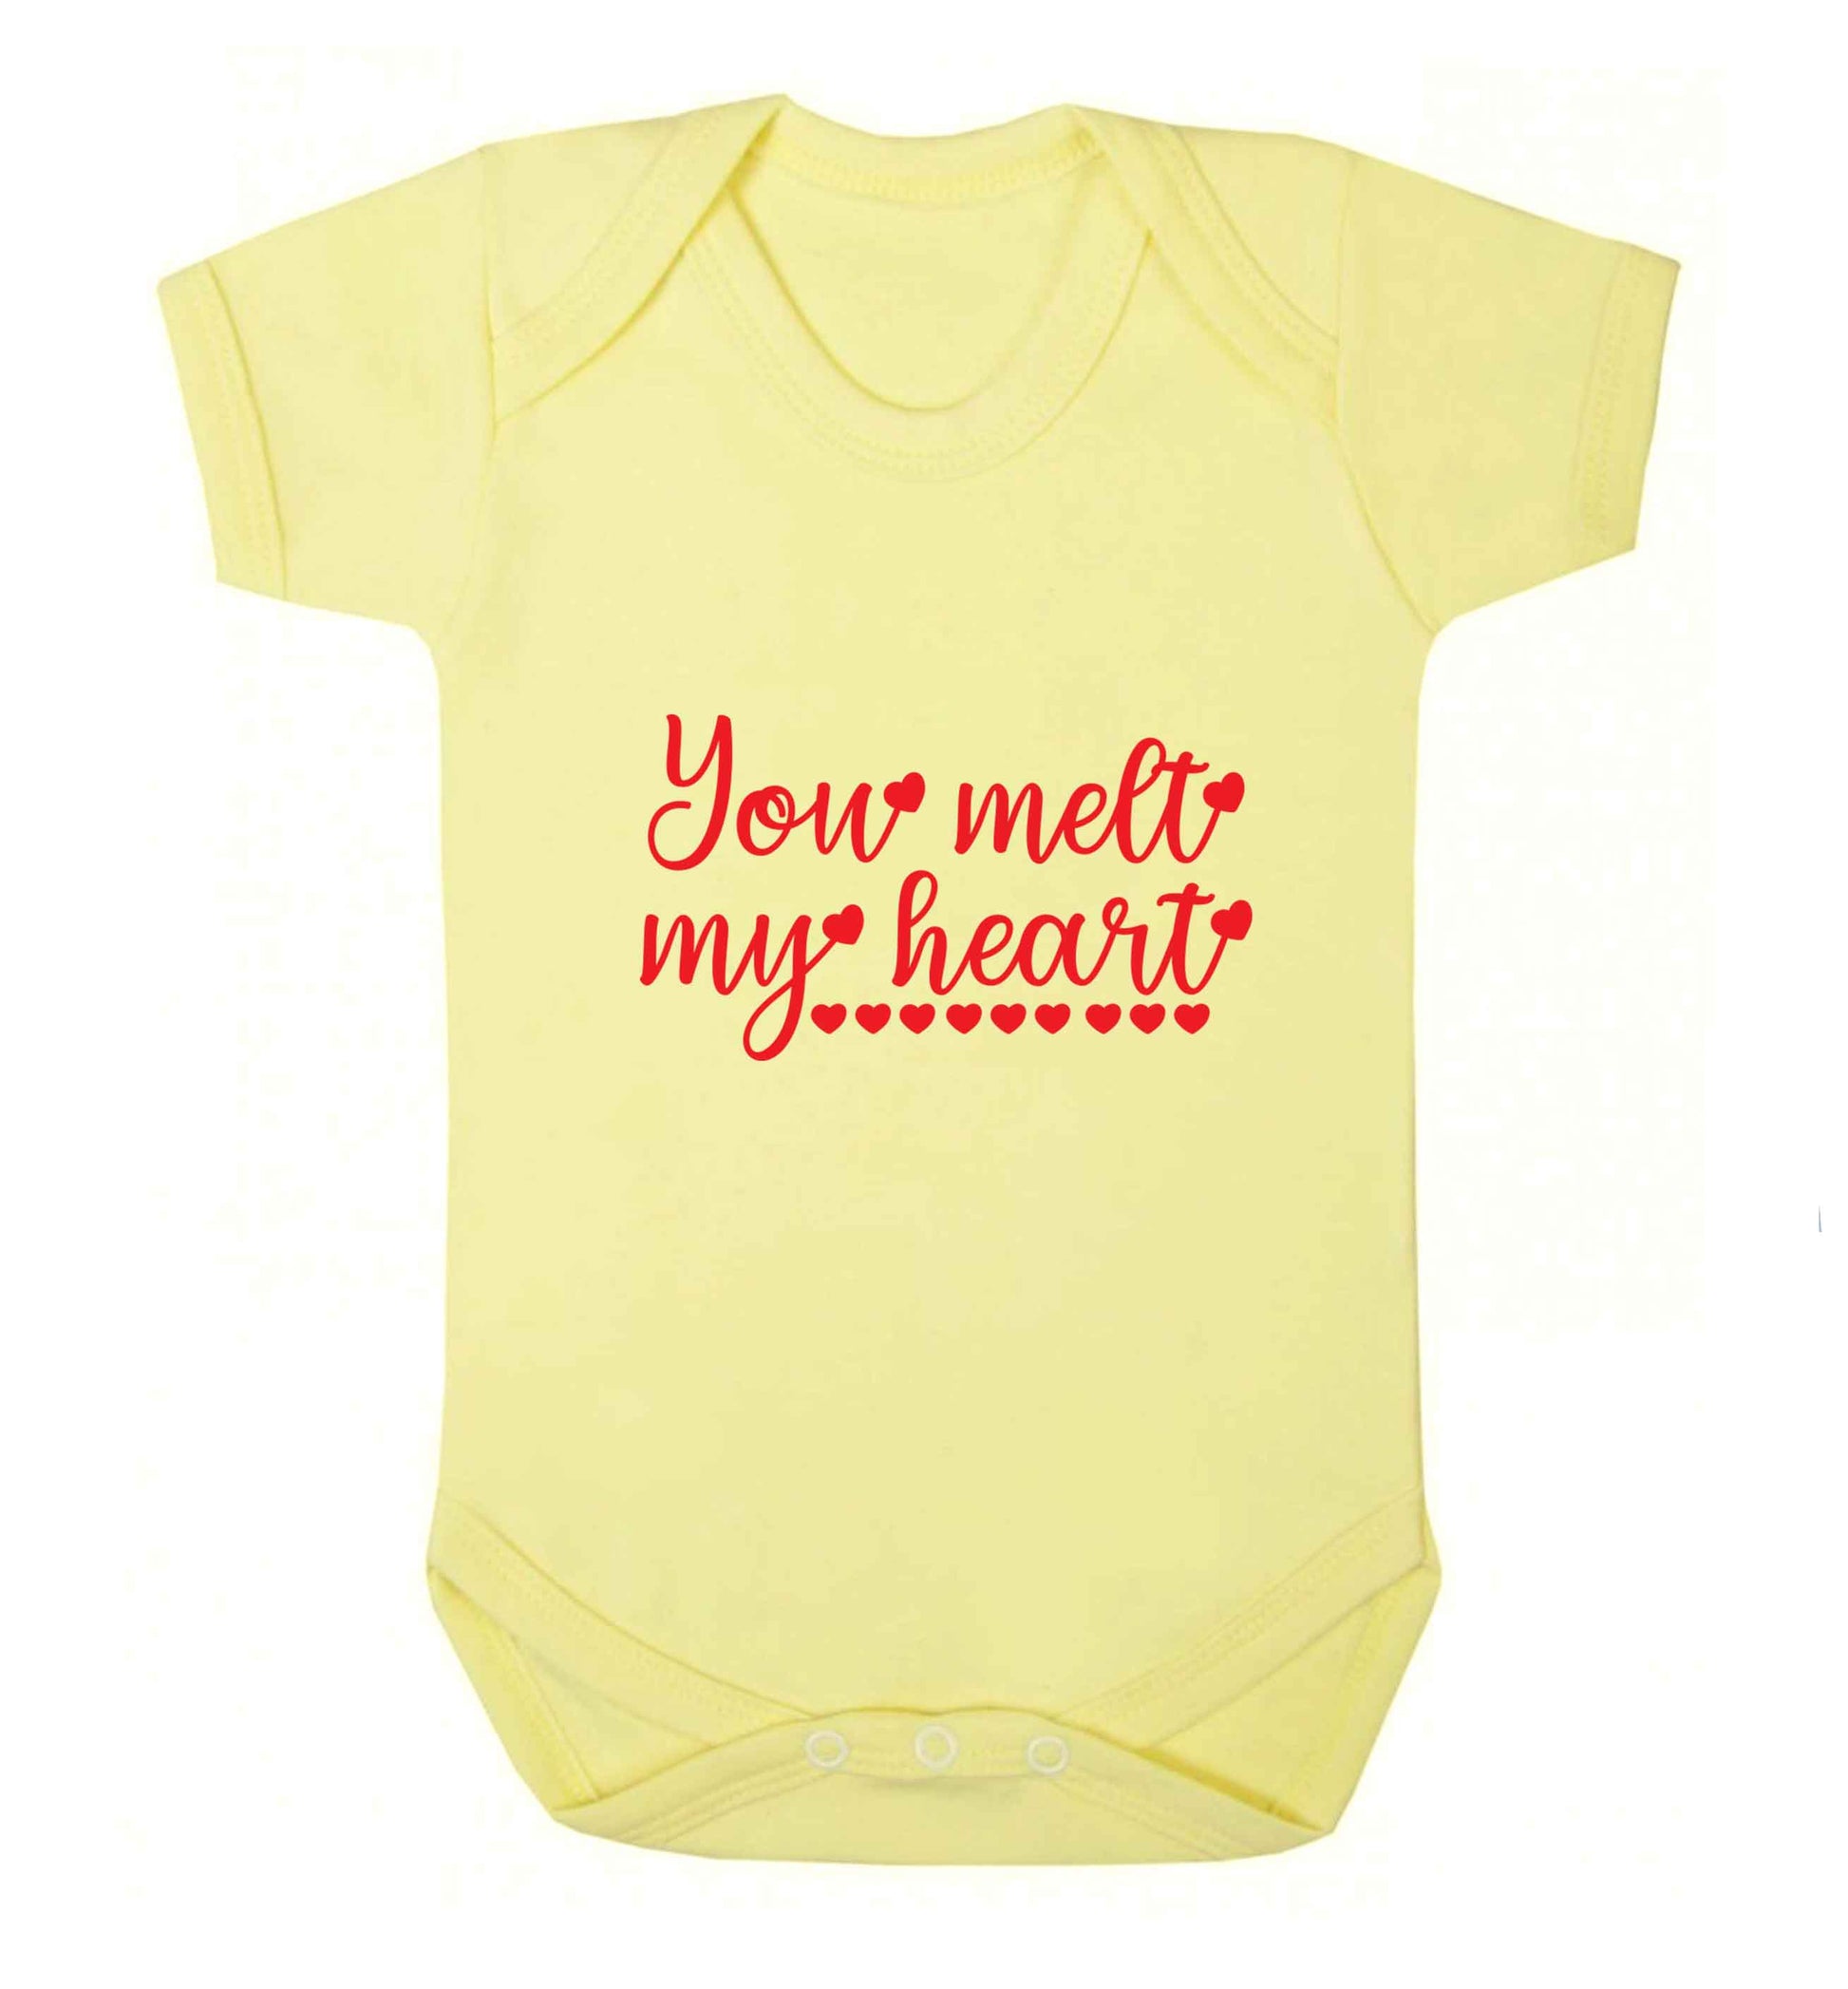 You melt my heart baby vest pale yellow 18-24 months